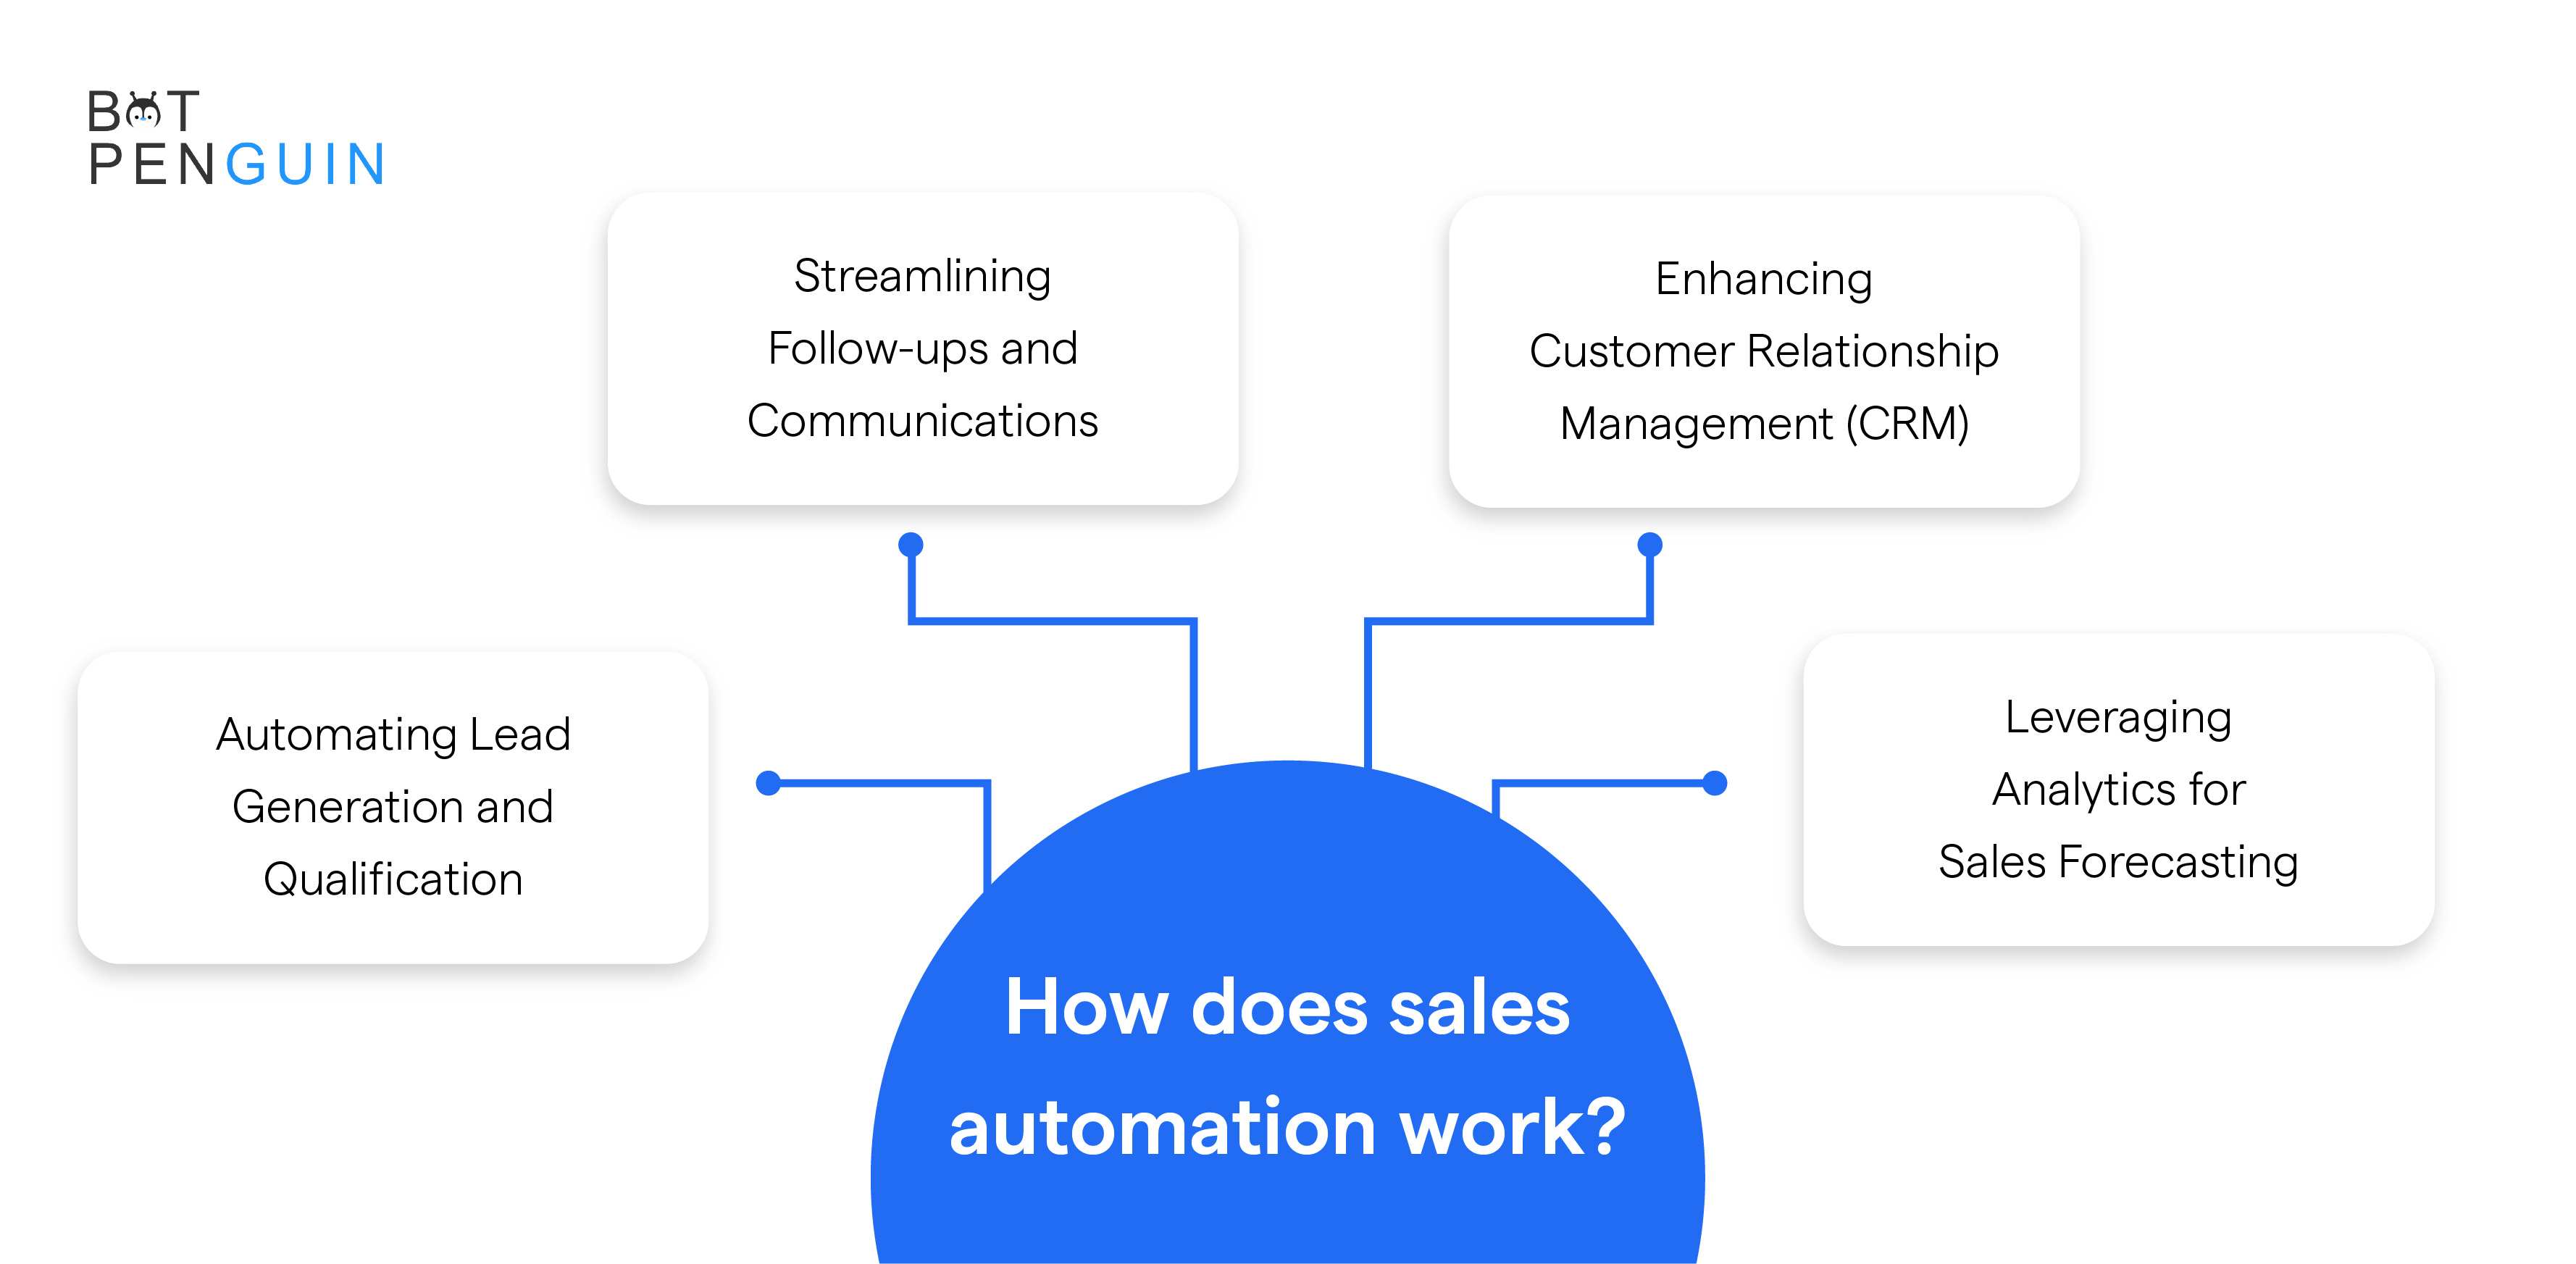 How does sales automation work?